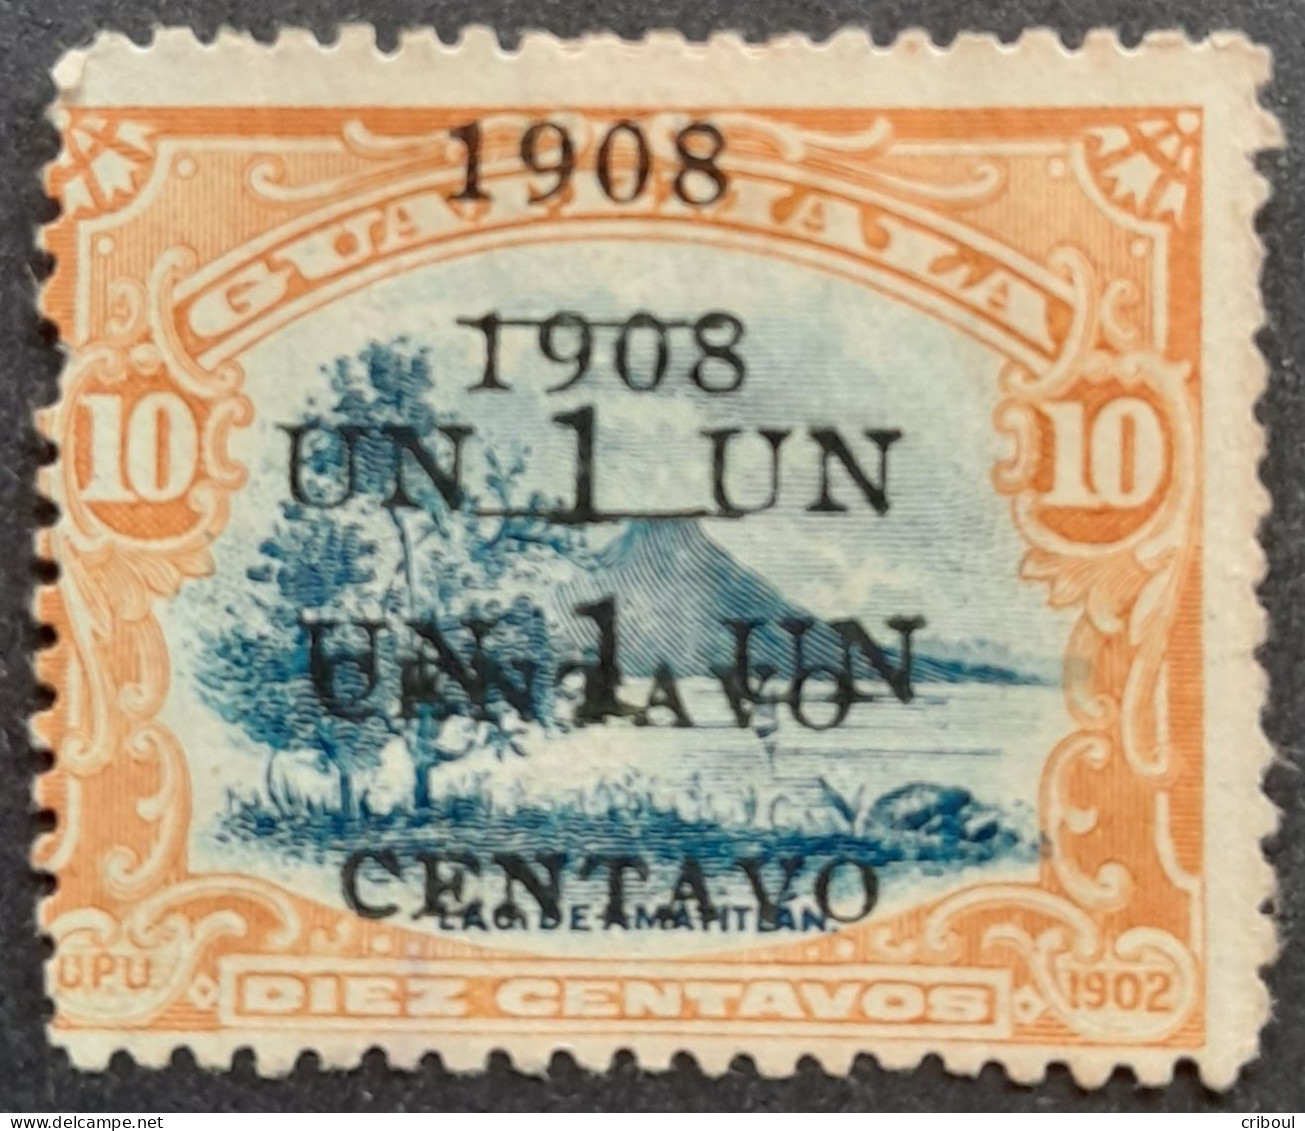 Guatemala 1908 Lac Lake Amatitlan Double Surcharge Overprint UN CENTAVO Yvert 138a (*) MNG - Oddities On Stamps